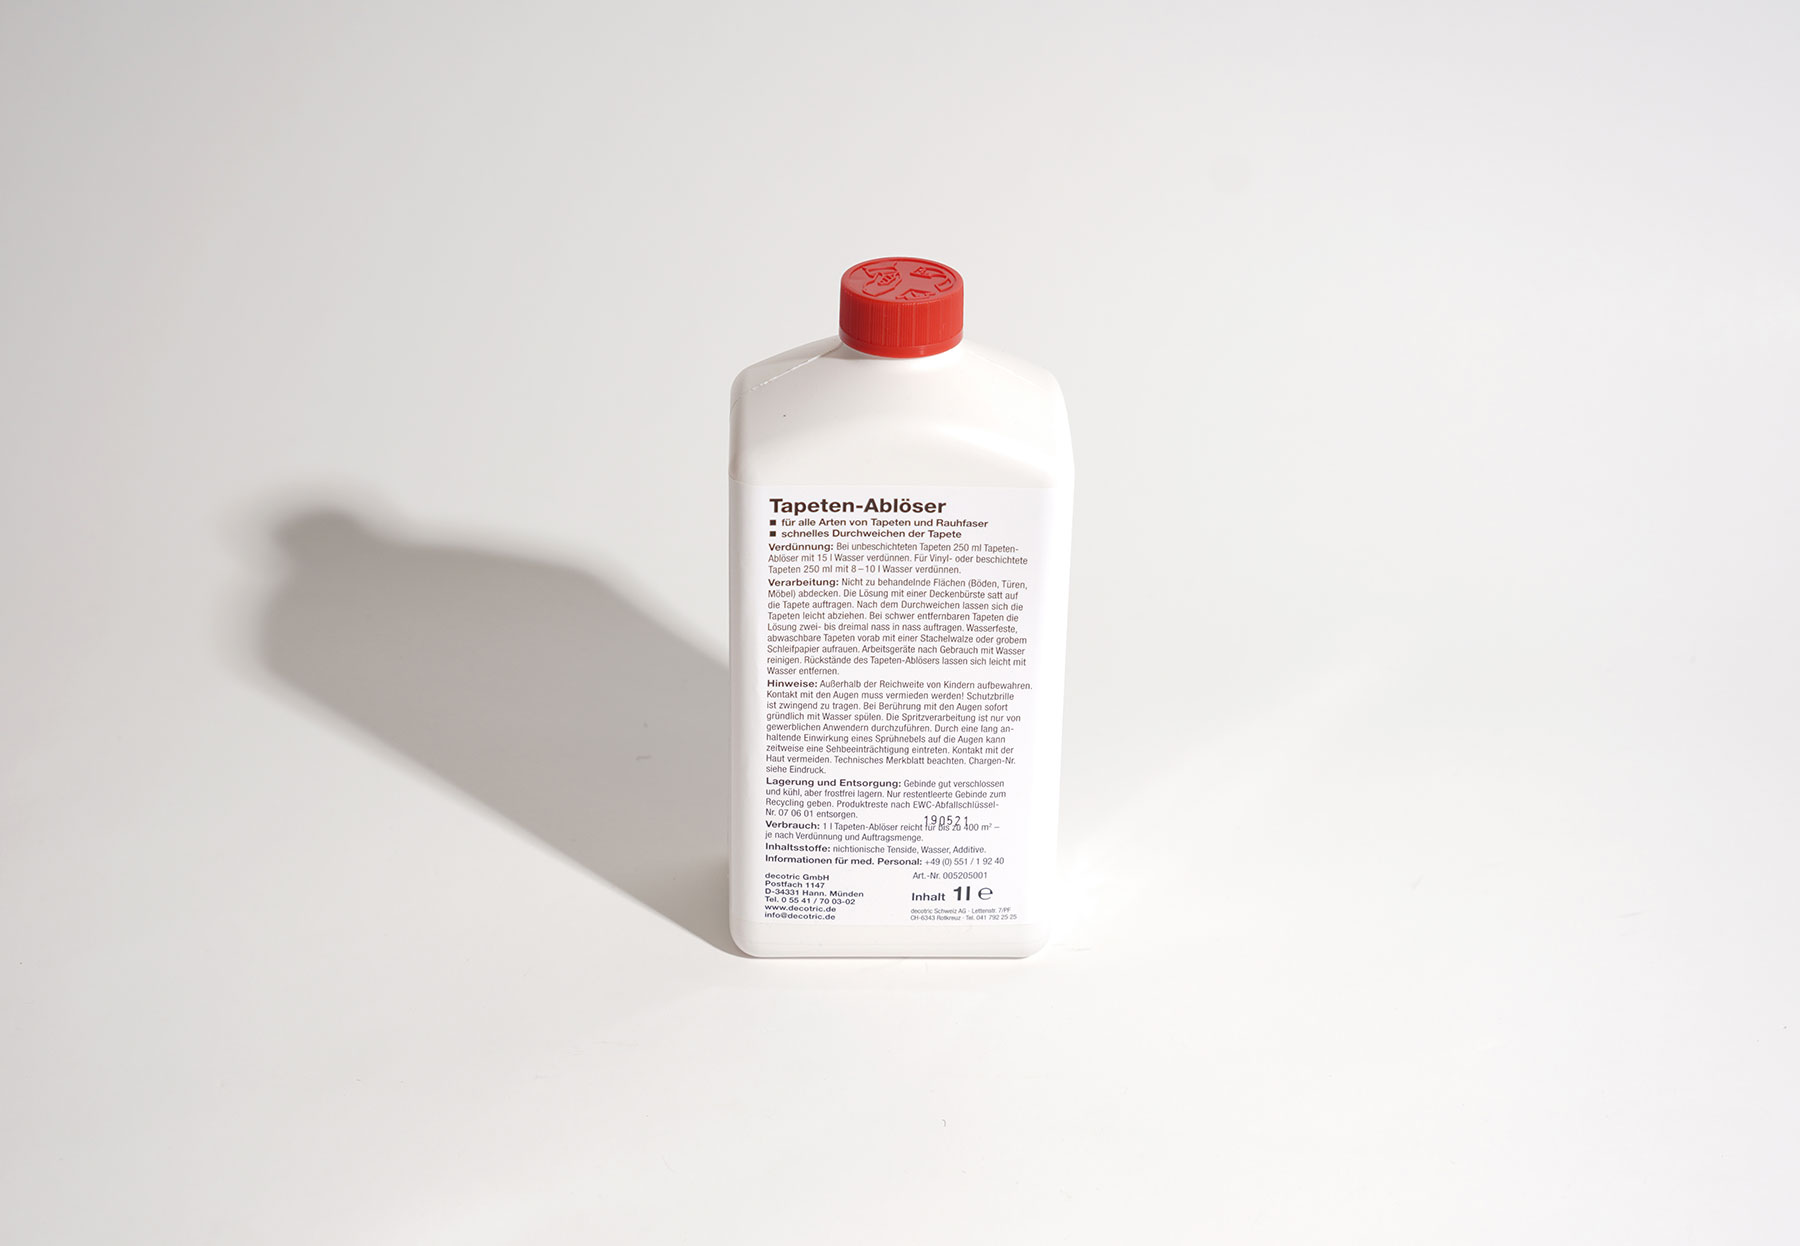             Wallpaper remover 1L, concentrate for wallpaper removal
        